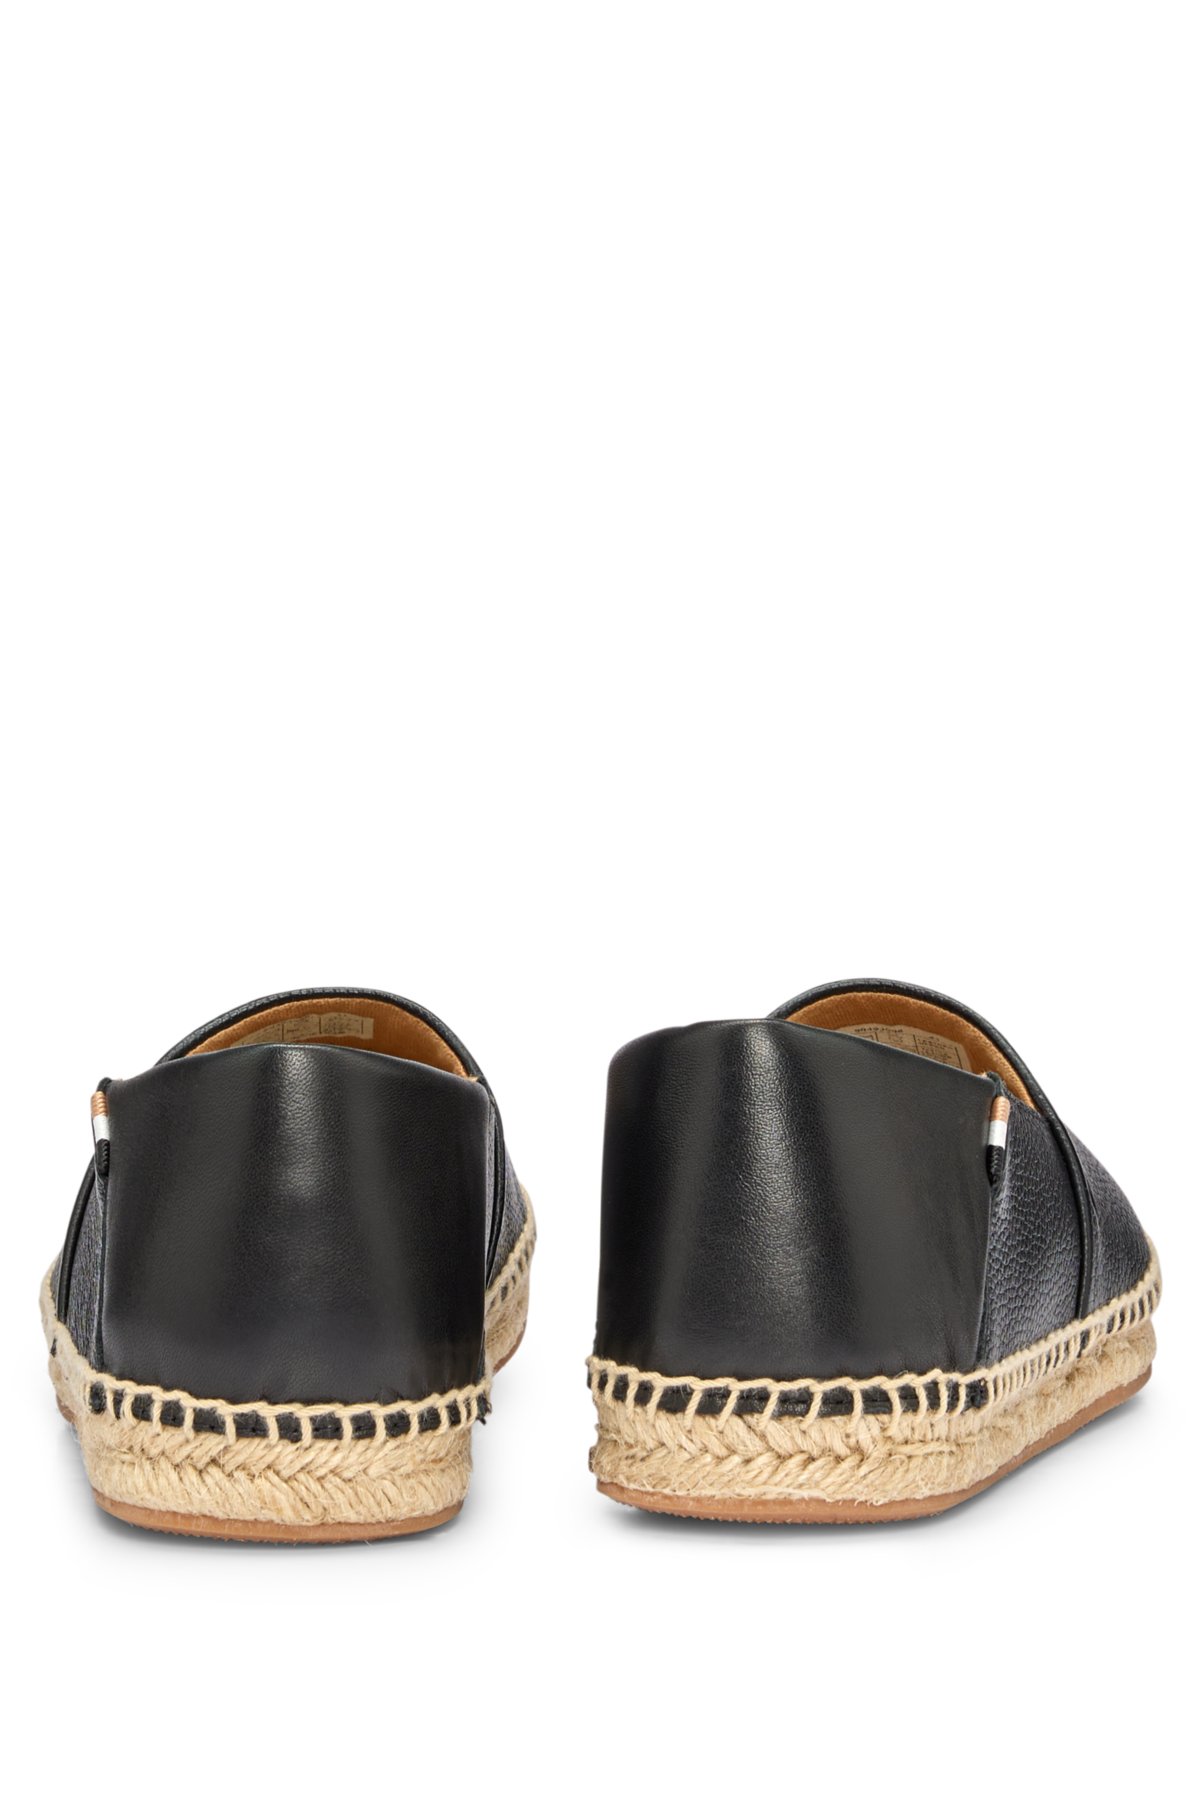 BOSS - Slip-on espadrilles in leather with signature details